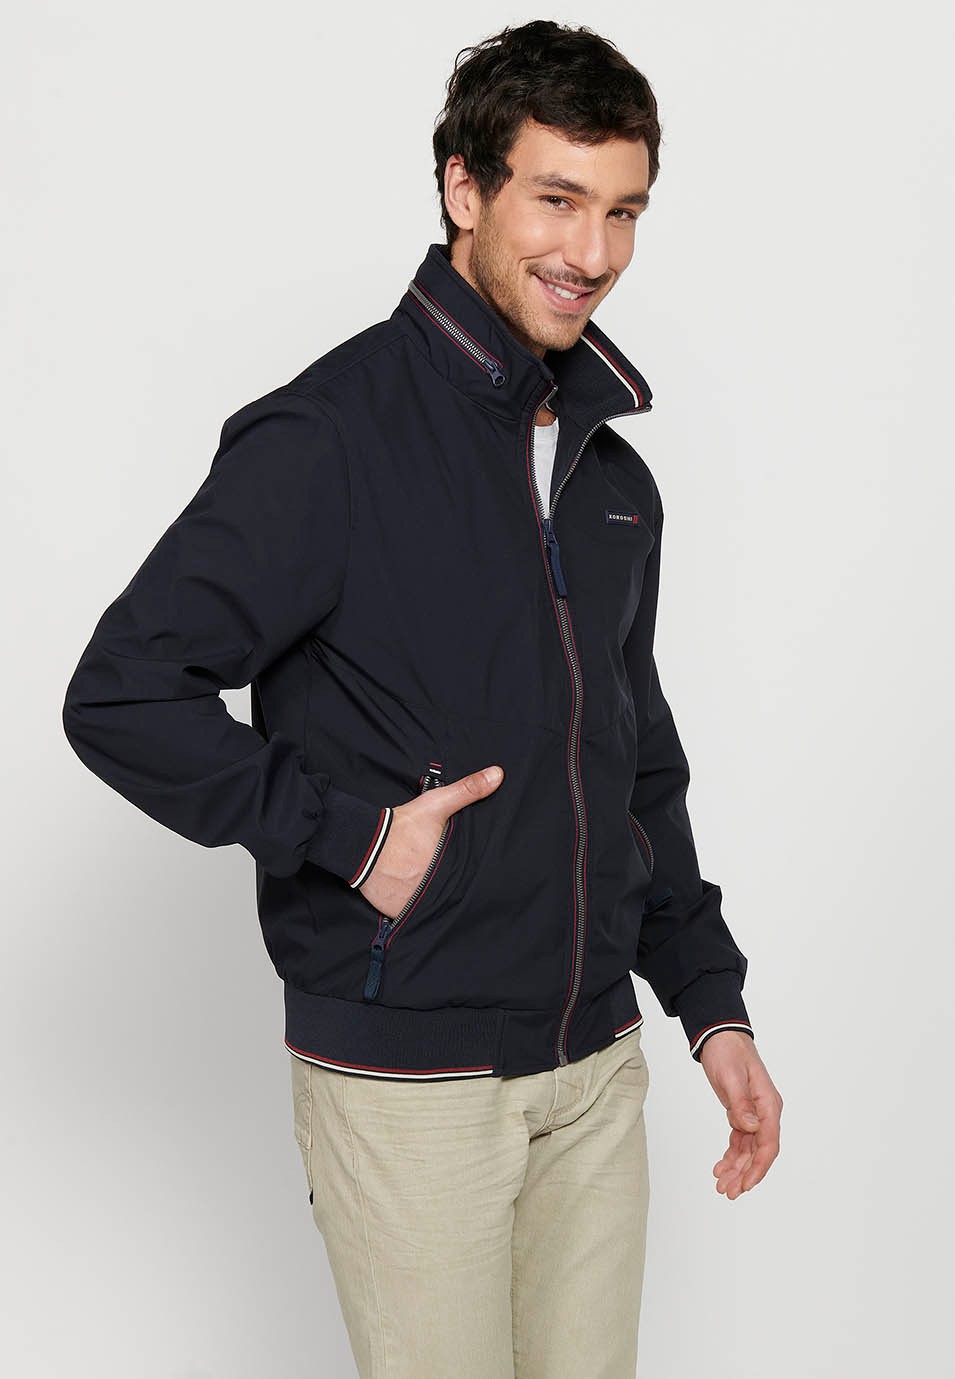 Long-sleeved high-neck jacket with front zipper closure and ribbed finishes with pockets, one inside in Navy for Men 2